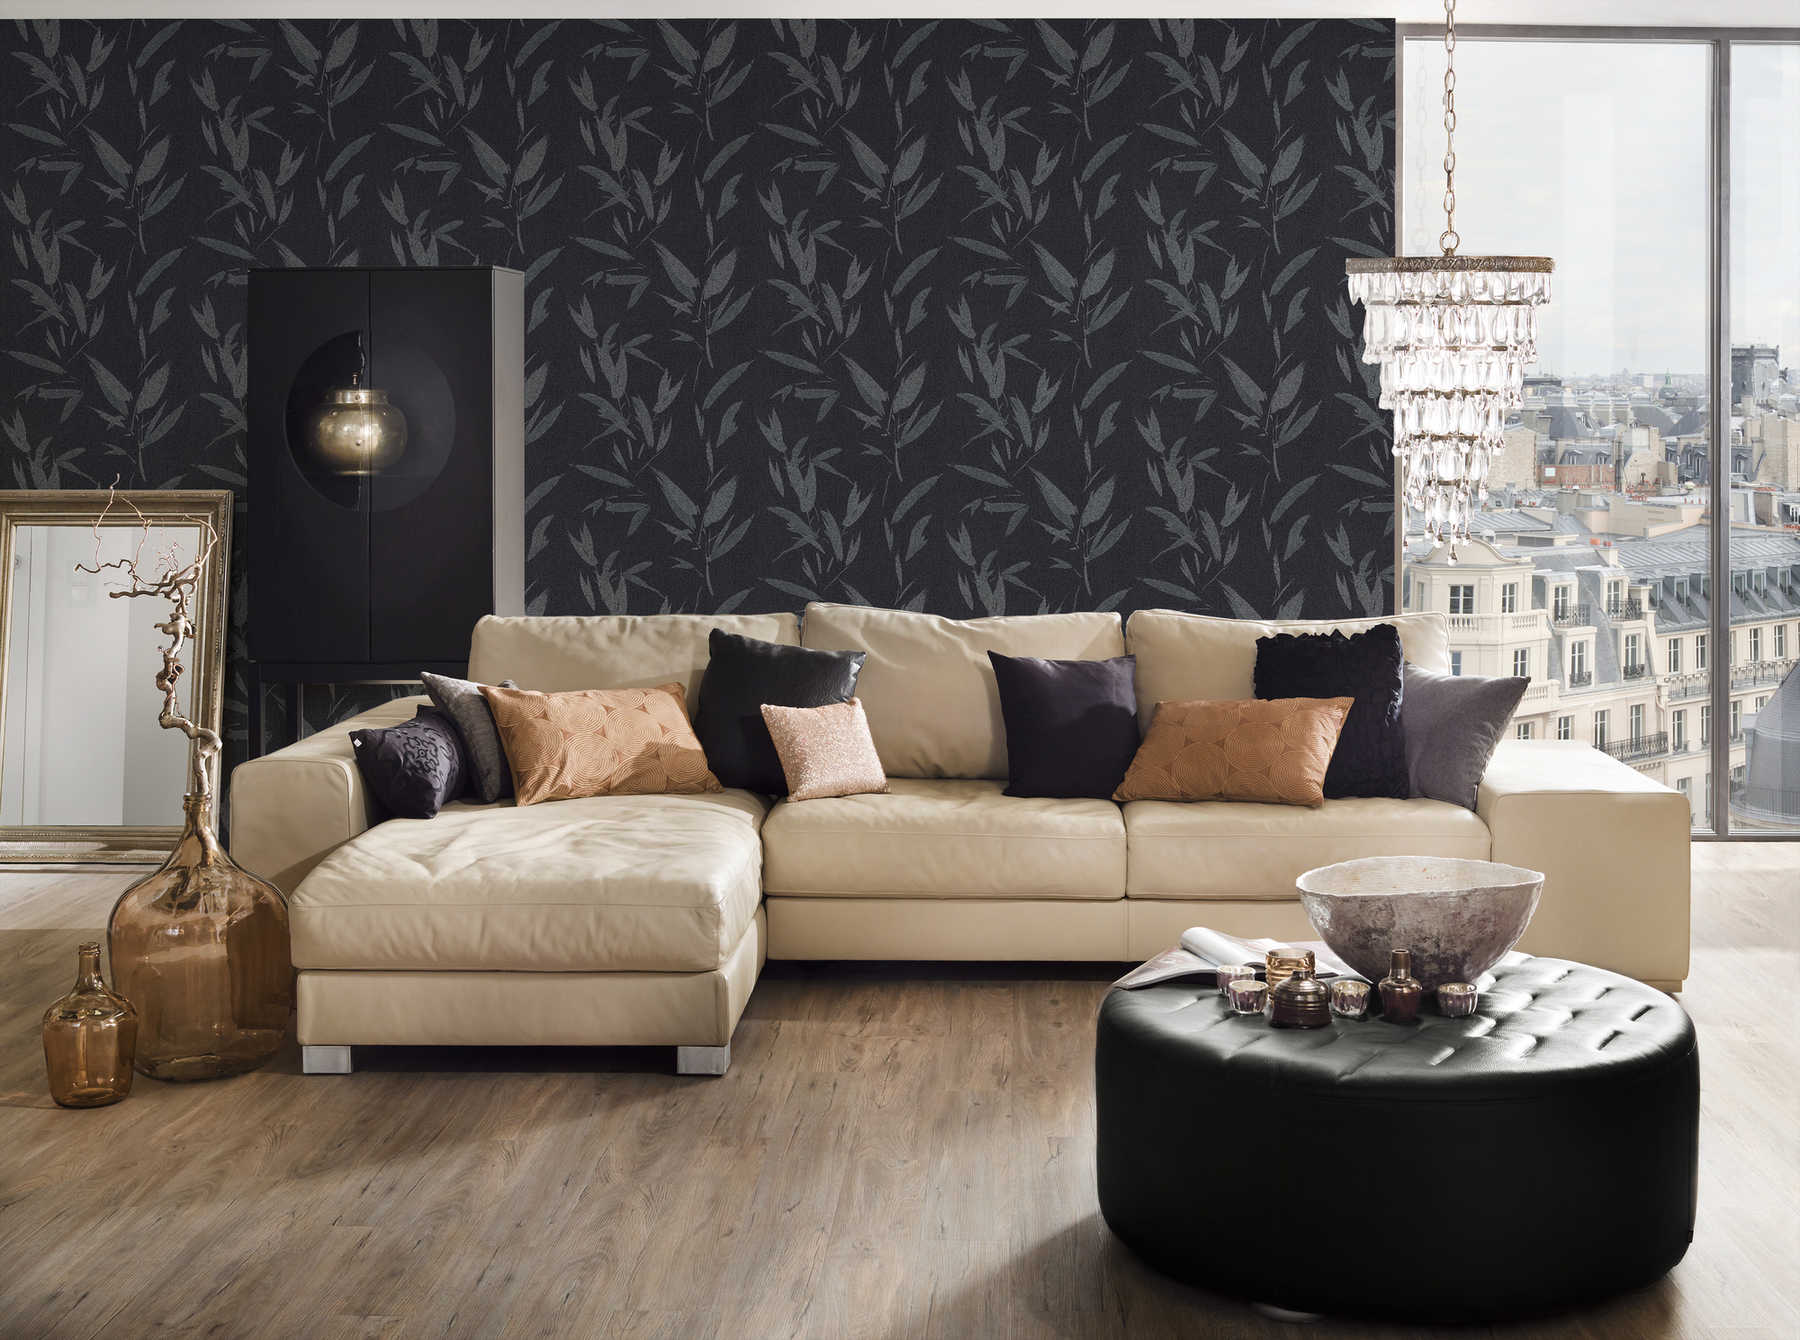             Leaves wallpaper abstract with textile look - black, grey
        